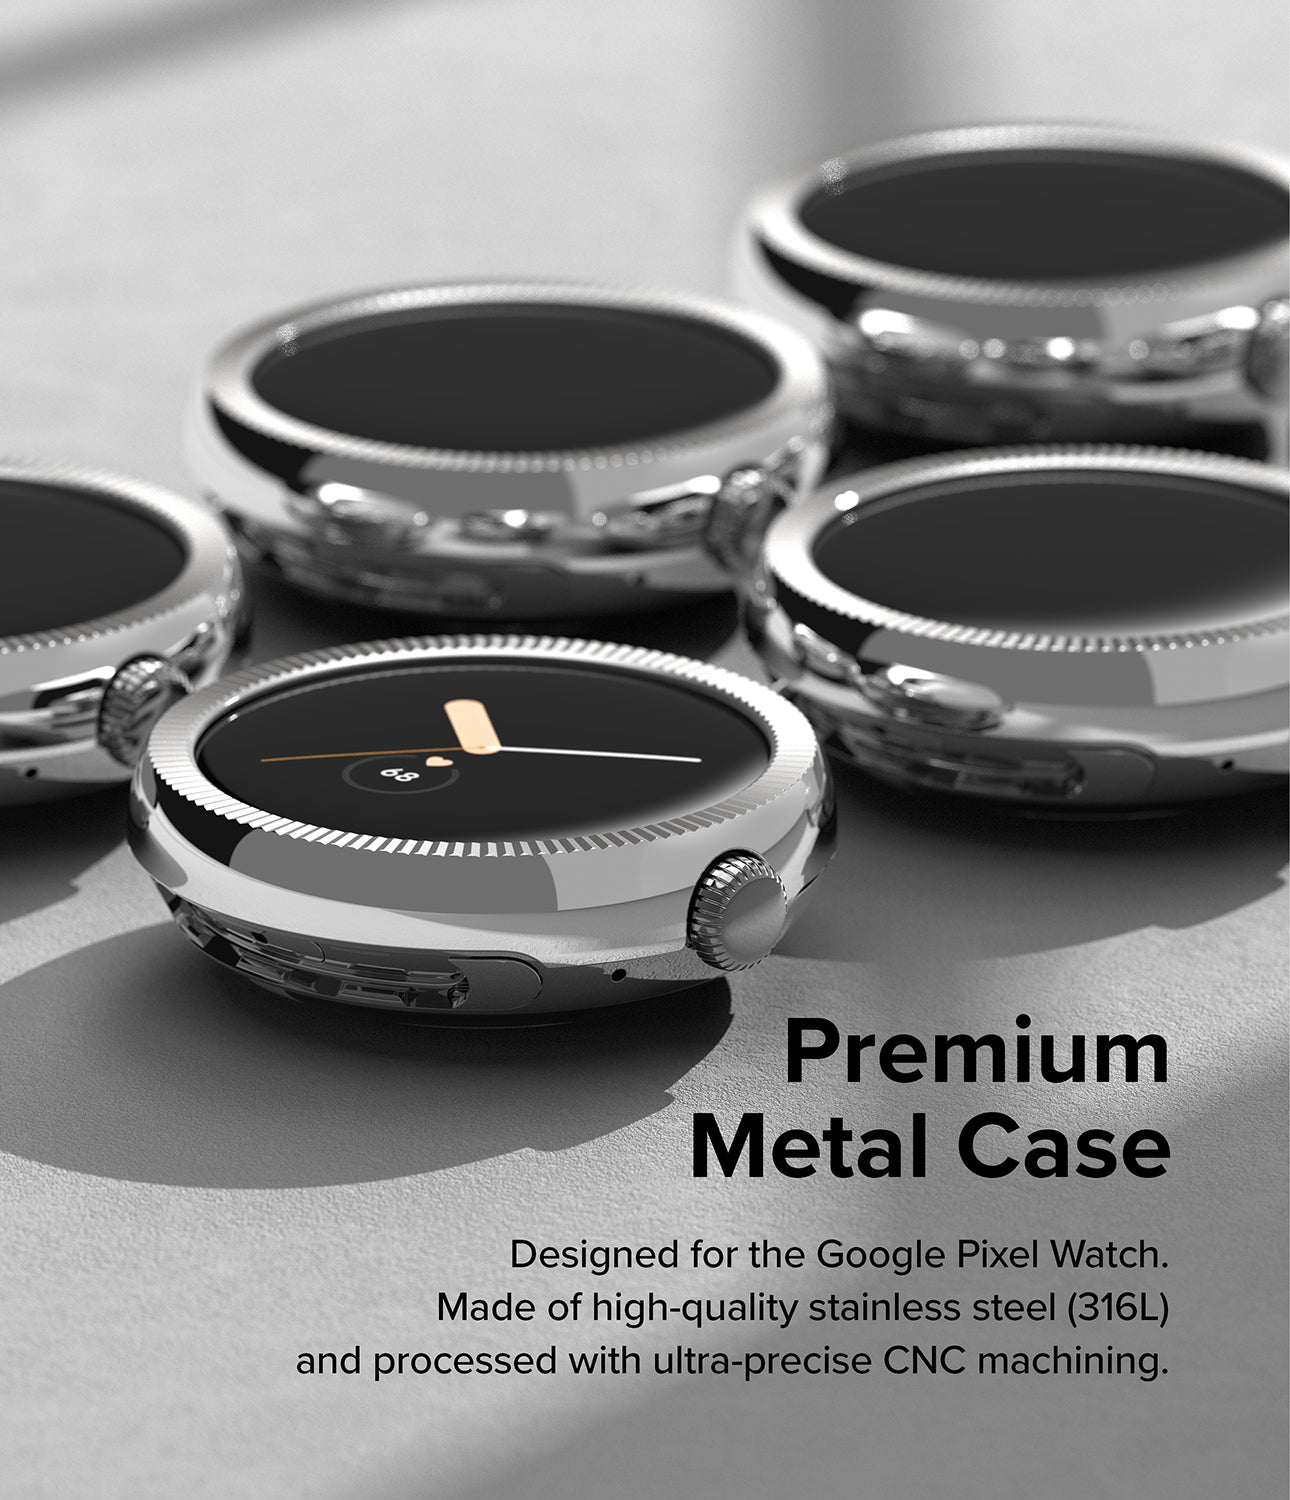 Premium Metal Case - Designed for the Google Pixel Watch. Made of high-quality stainless steel (316L) and processed with ultra-precise CNC machining.